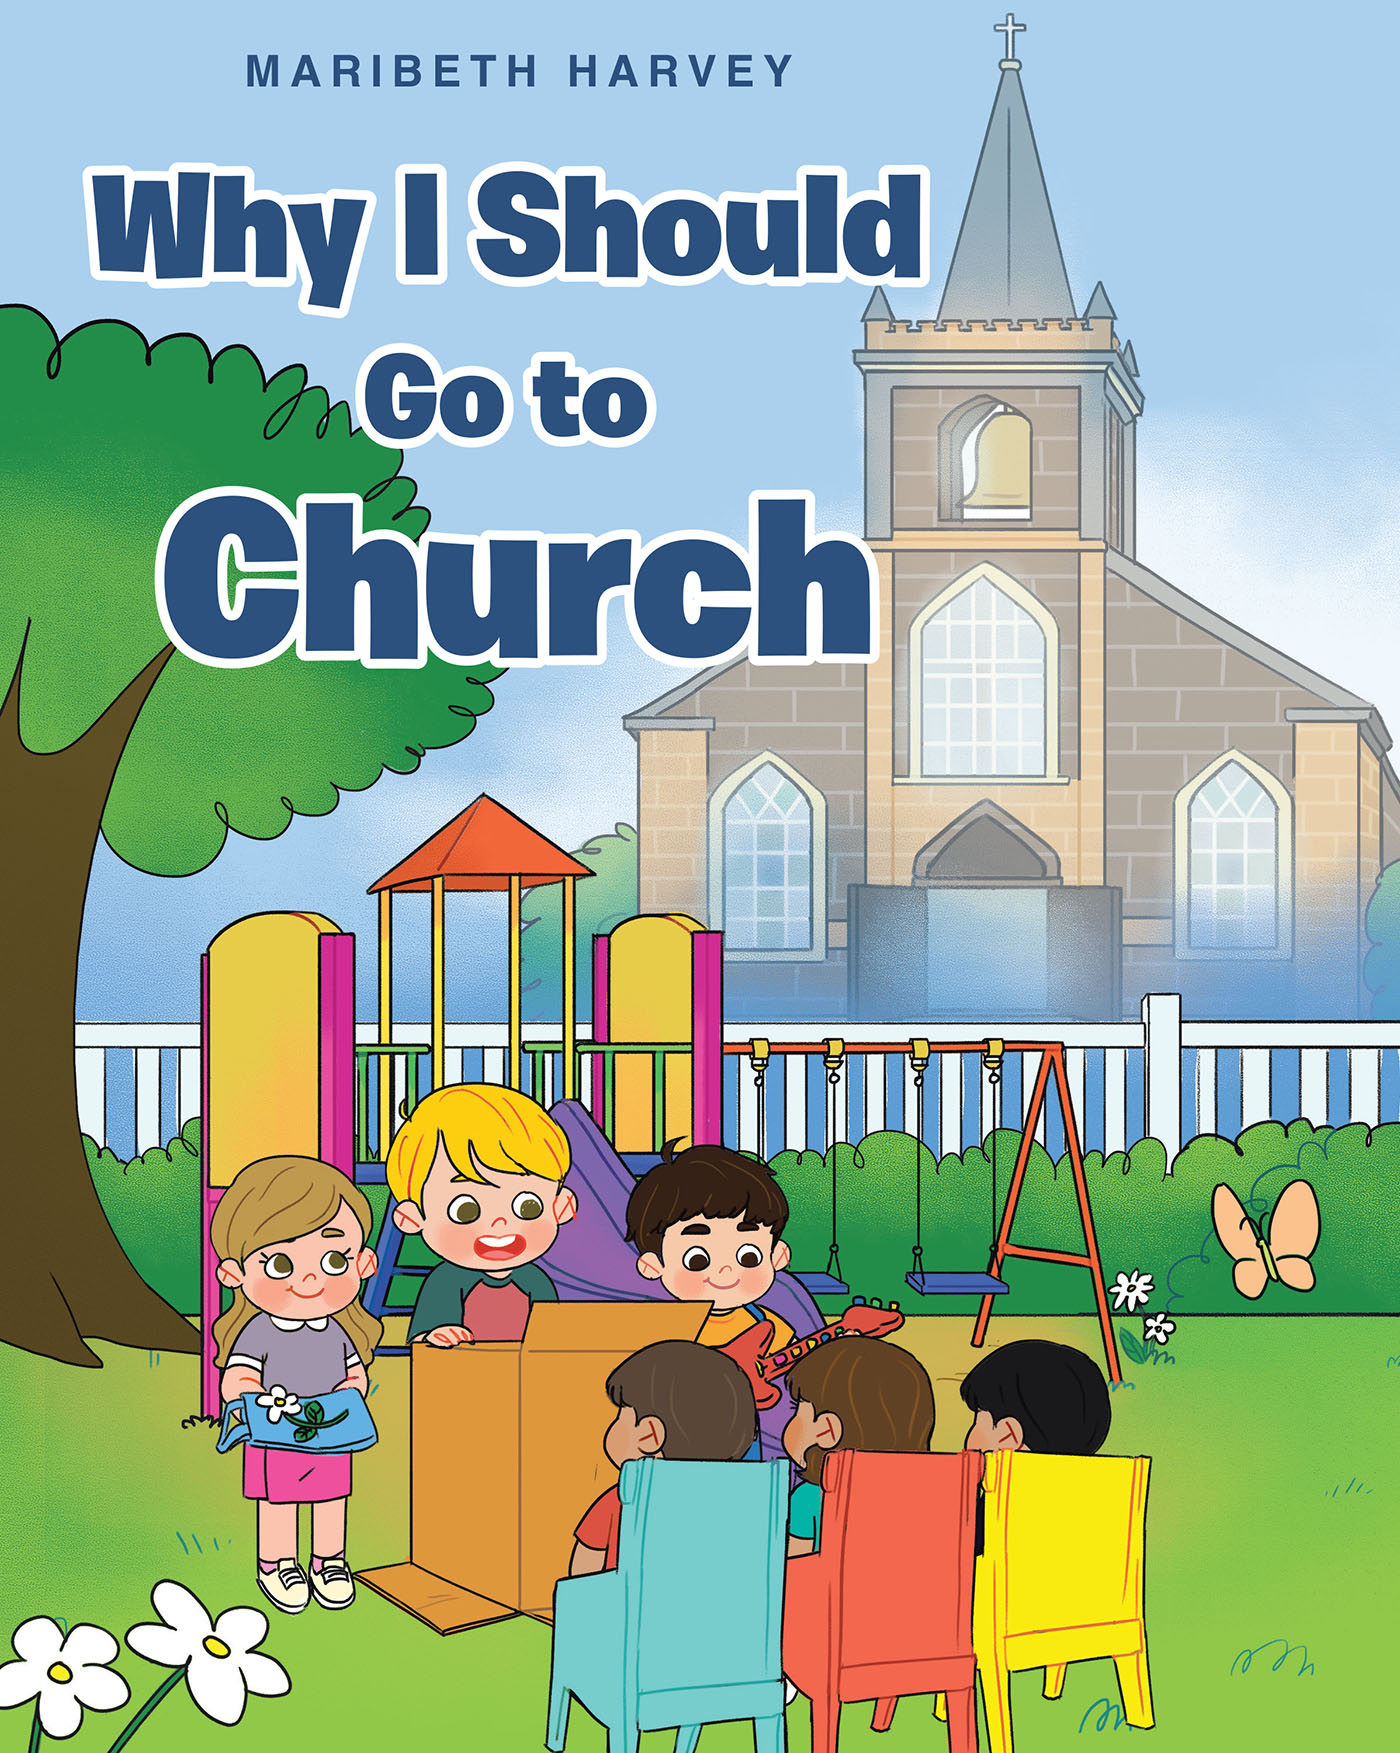 Maribeth Harvey’s Newly Released "Why I Should Go to Church" is a Charming Children’s Work That Explores the Positive Aspects of Being Active at Church